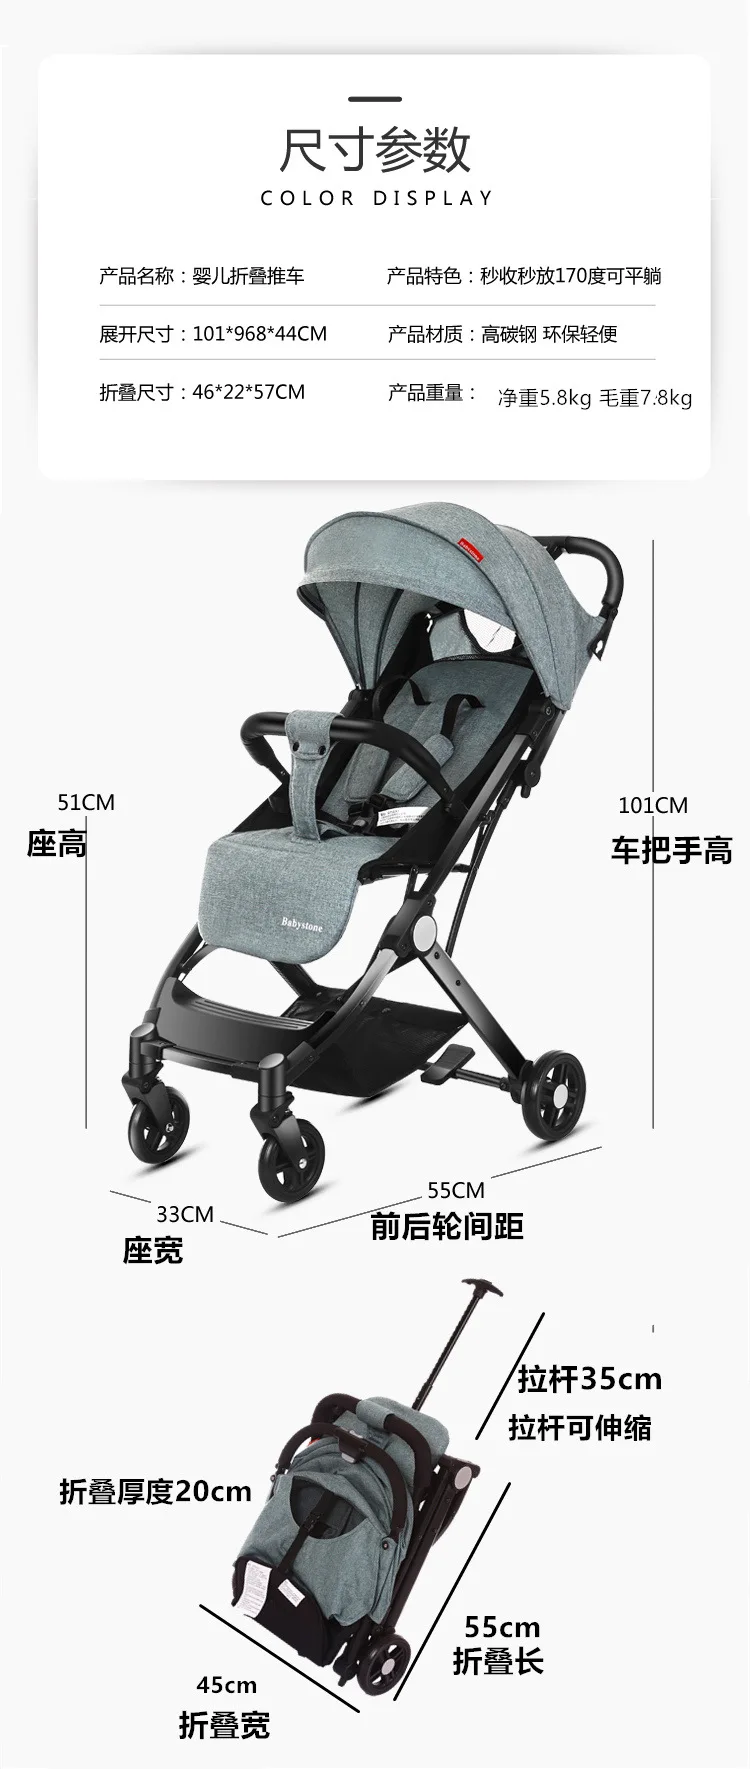 2019 new simple folding baby stroller